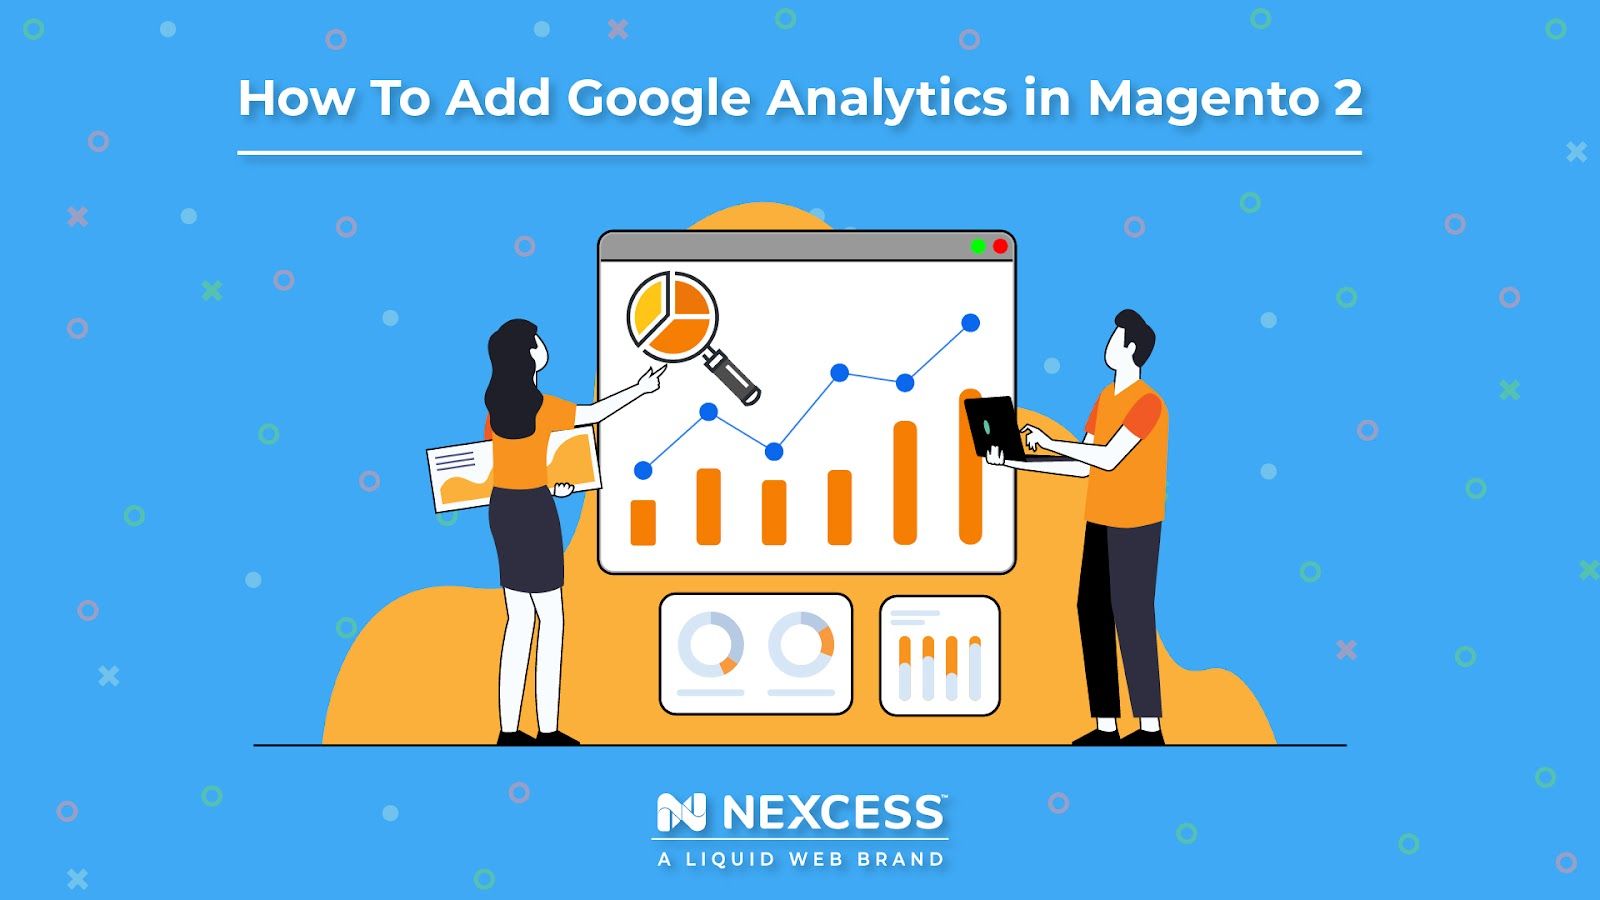 How to add Google Analytics in Magento 2.